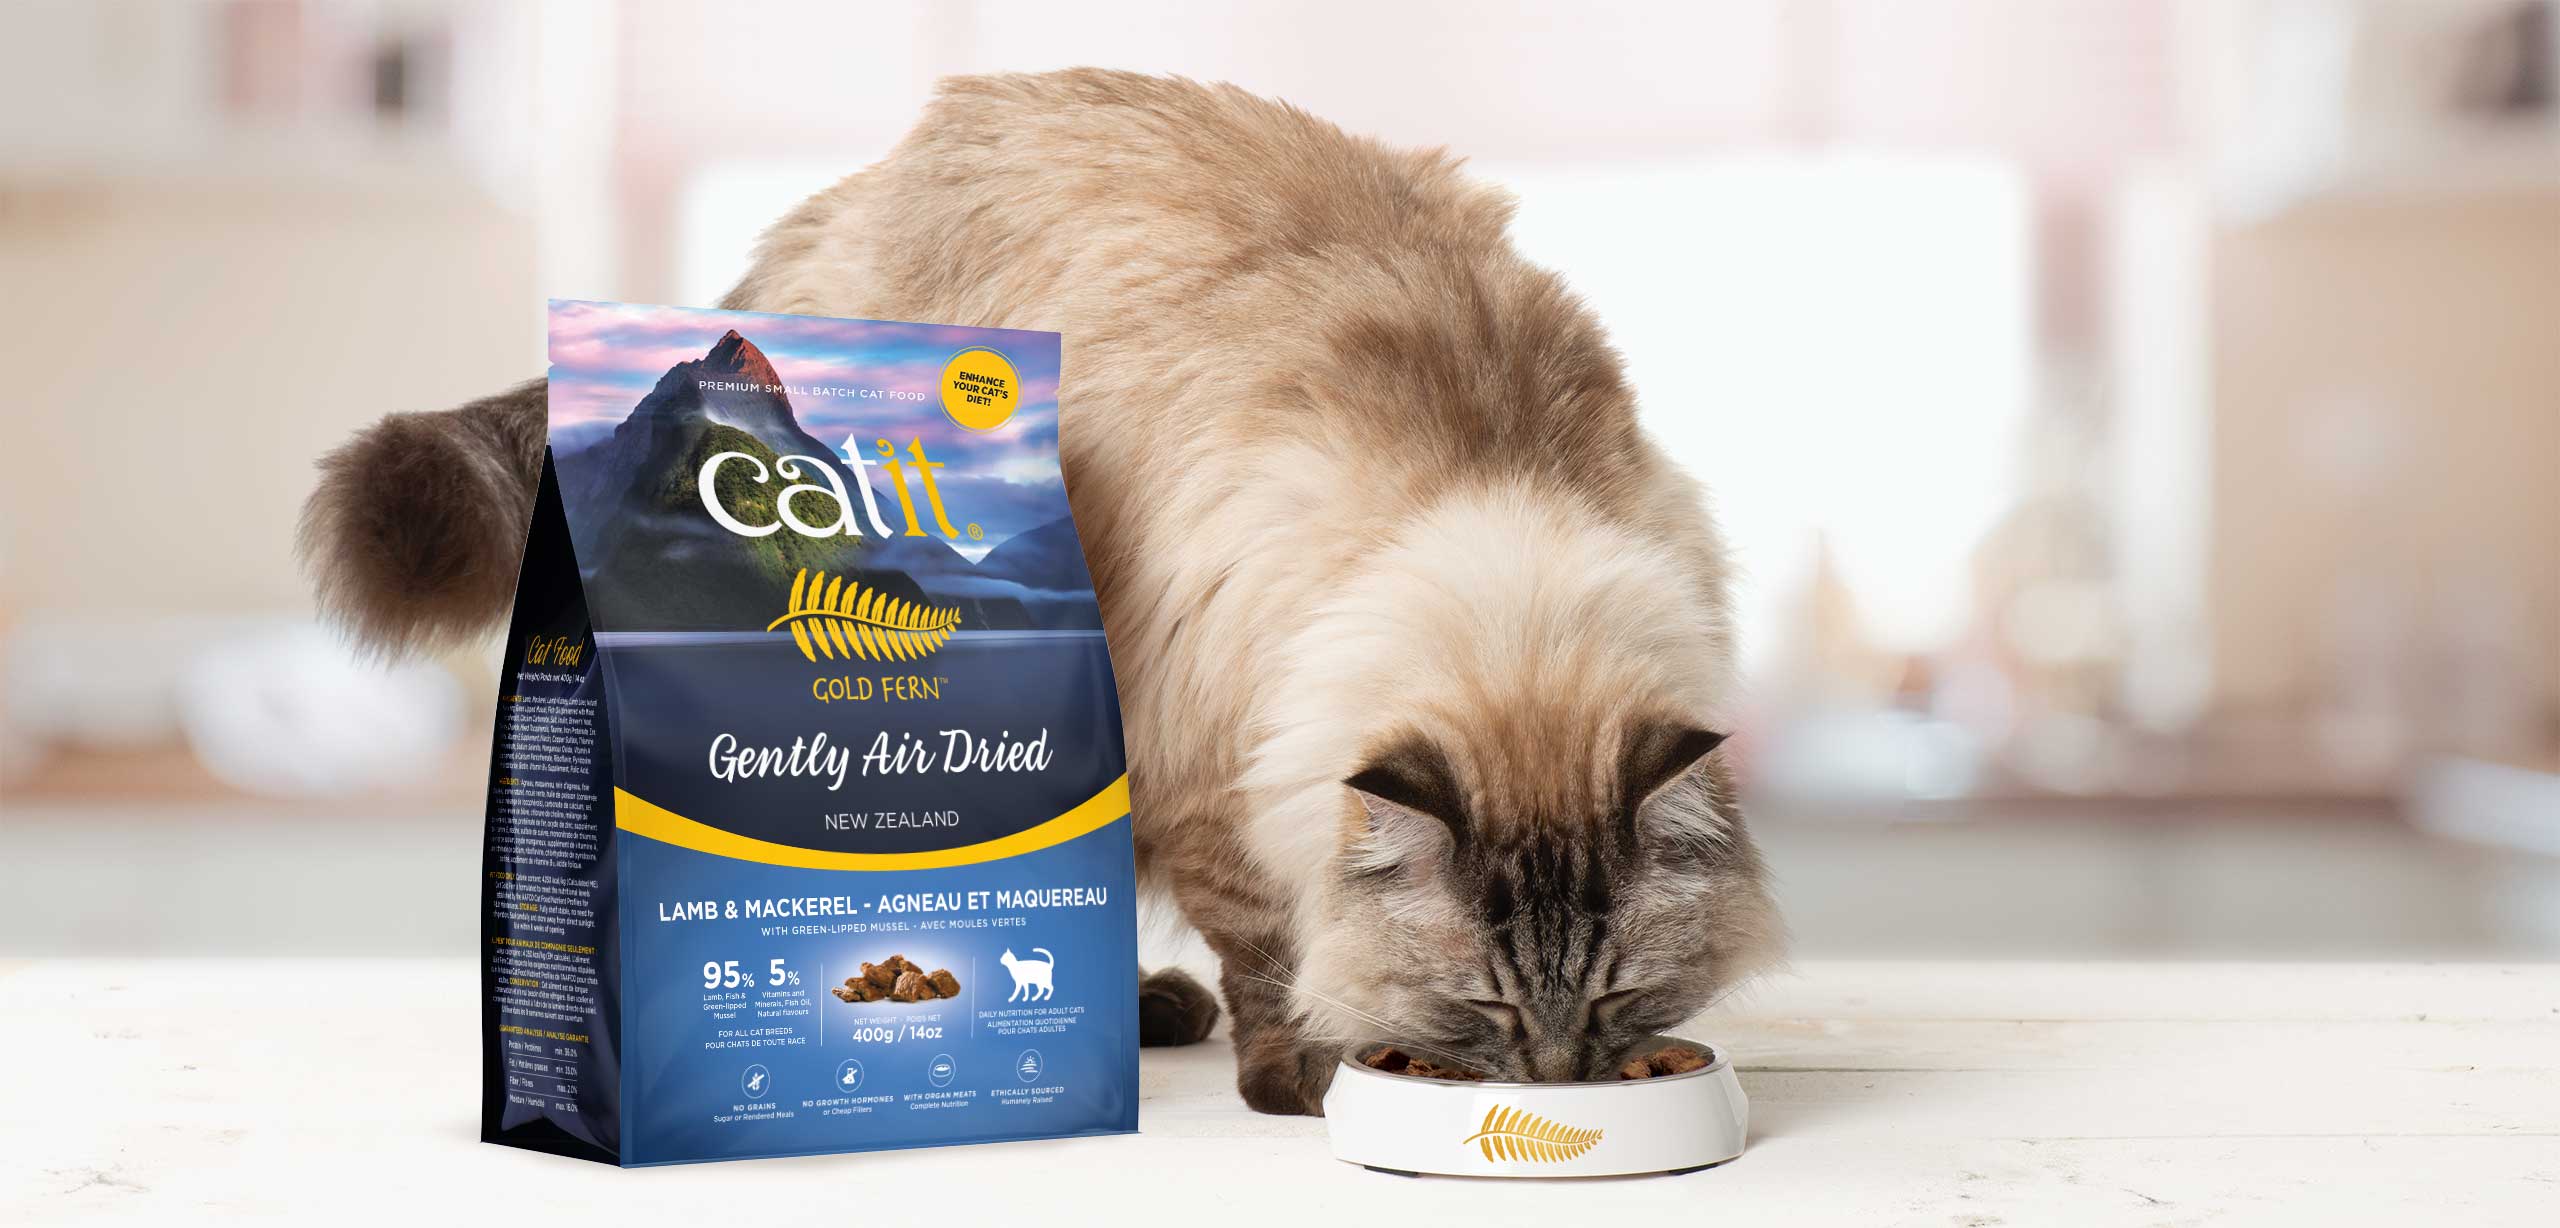 Dry cat kibble with well-preserved nutrients for enhancing your cat's diet